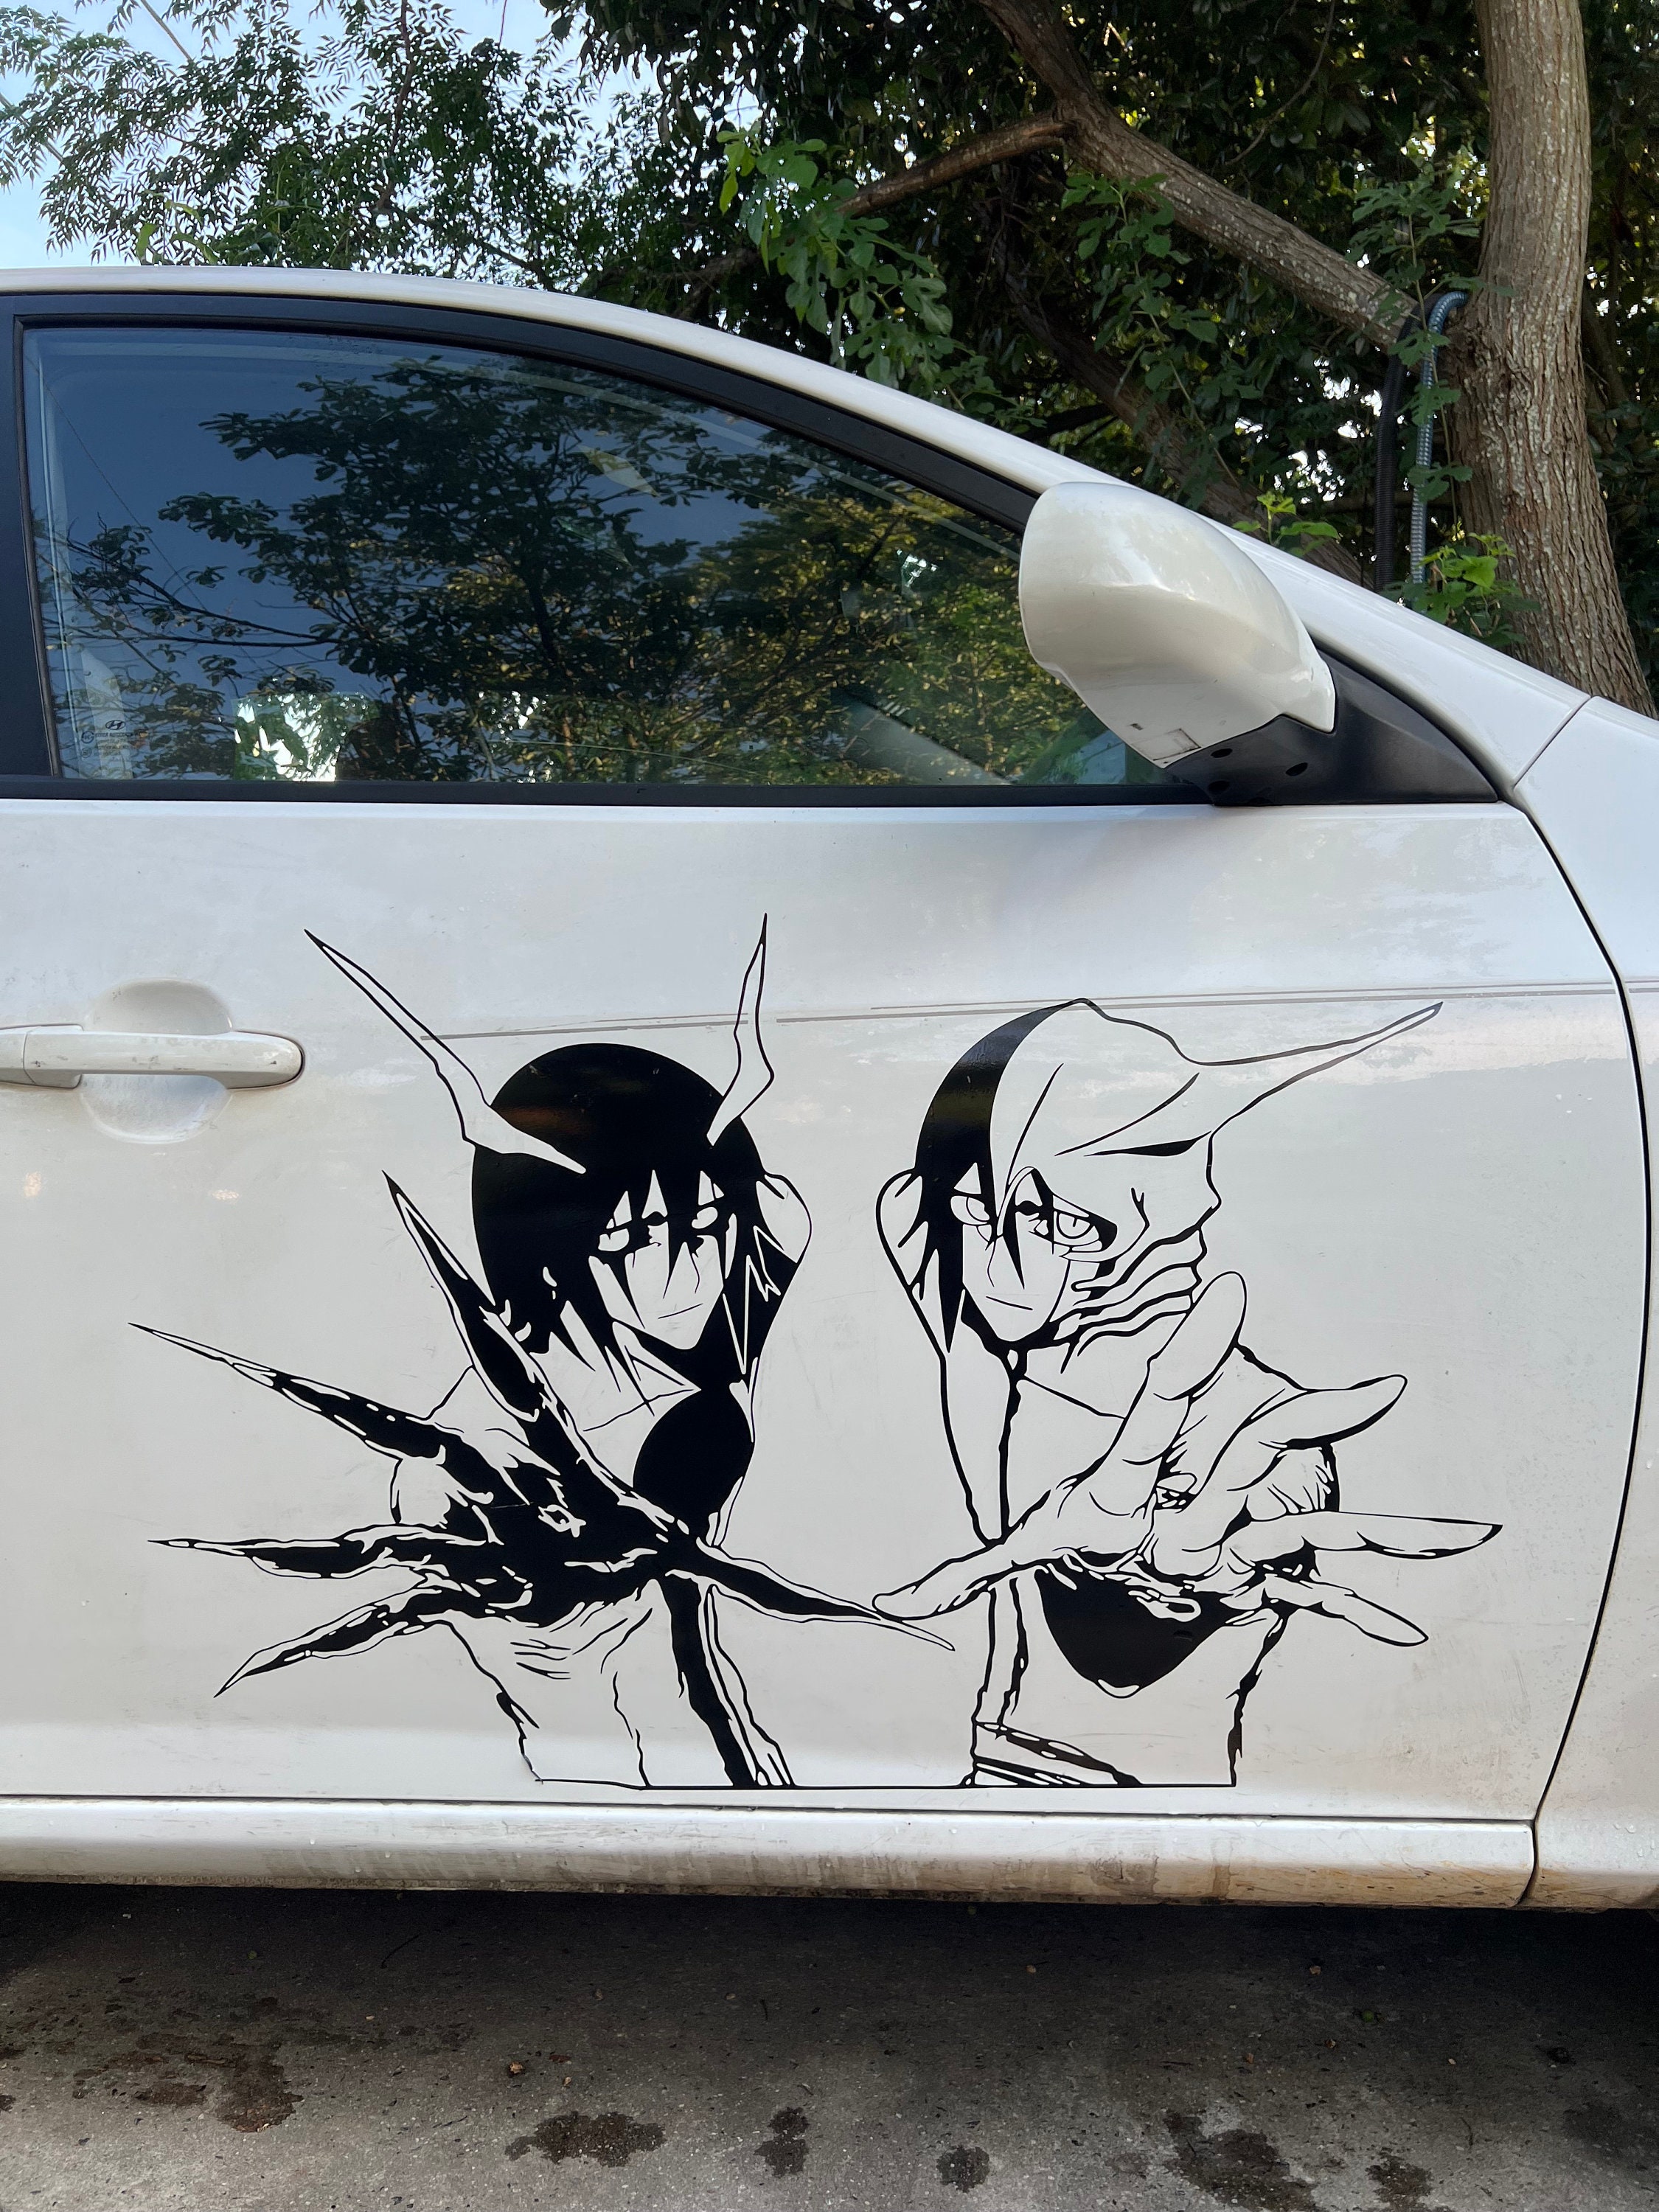 Anime ITASHA Zero Two Car Wrap Car Stickers Car Decal Fits with any cars   eBay